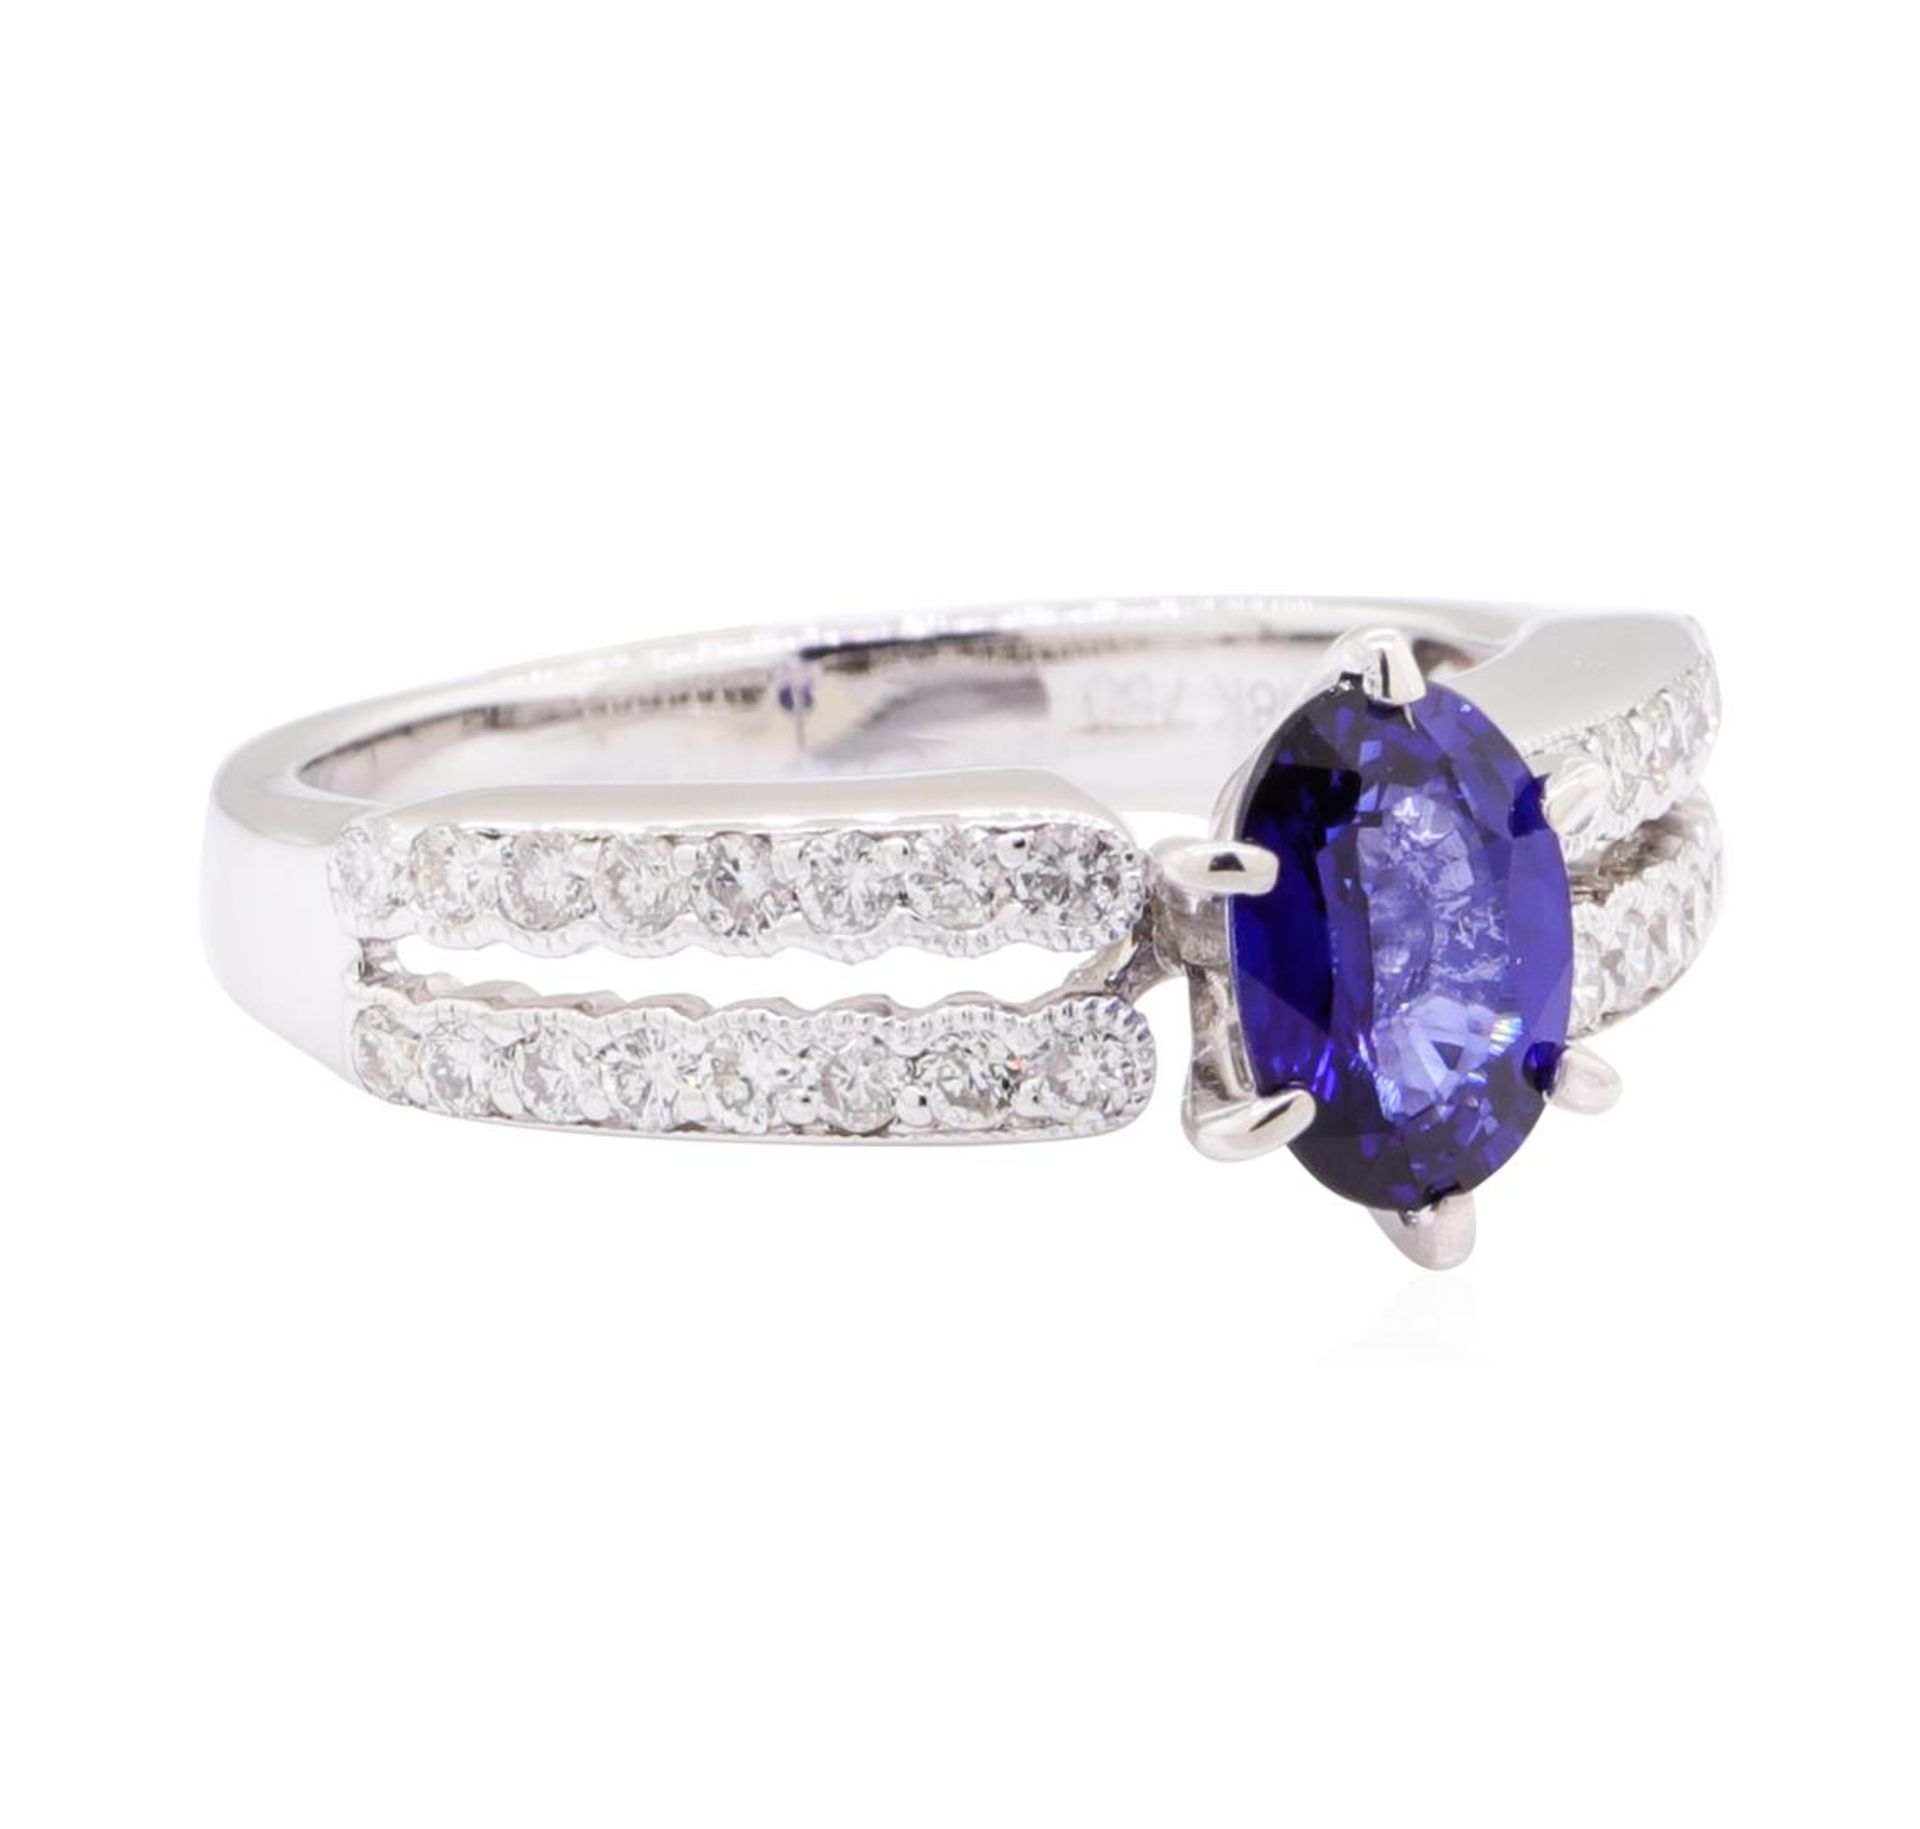 0.88ct Sapphire and Diamond Ring - 18KT White Gold